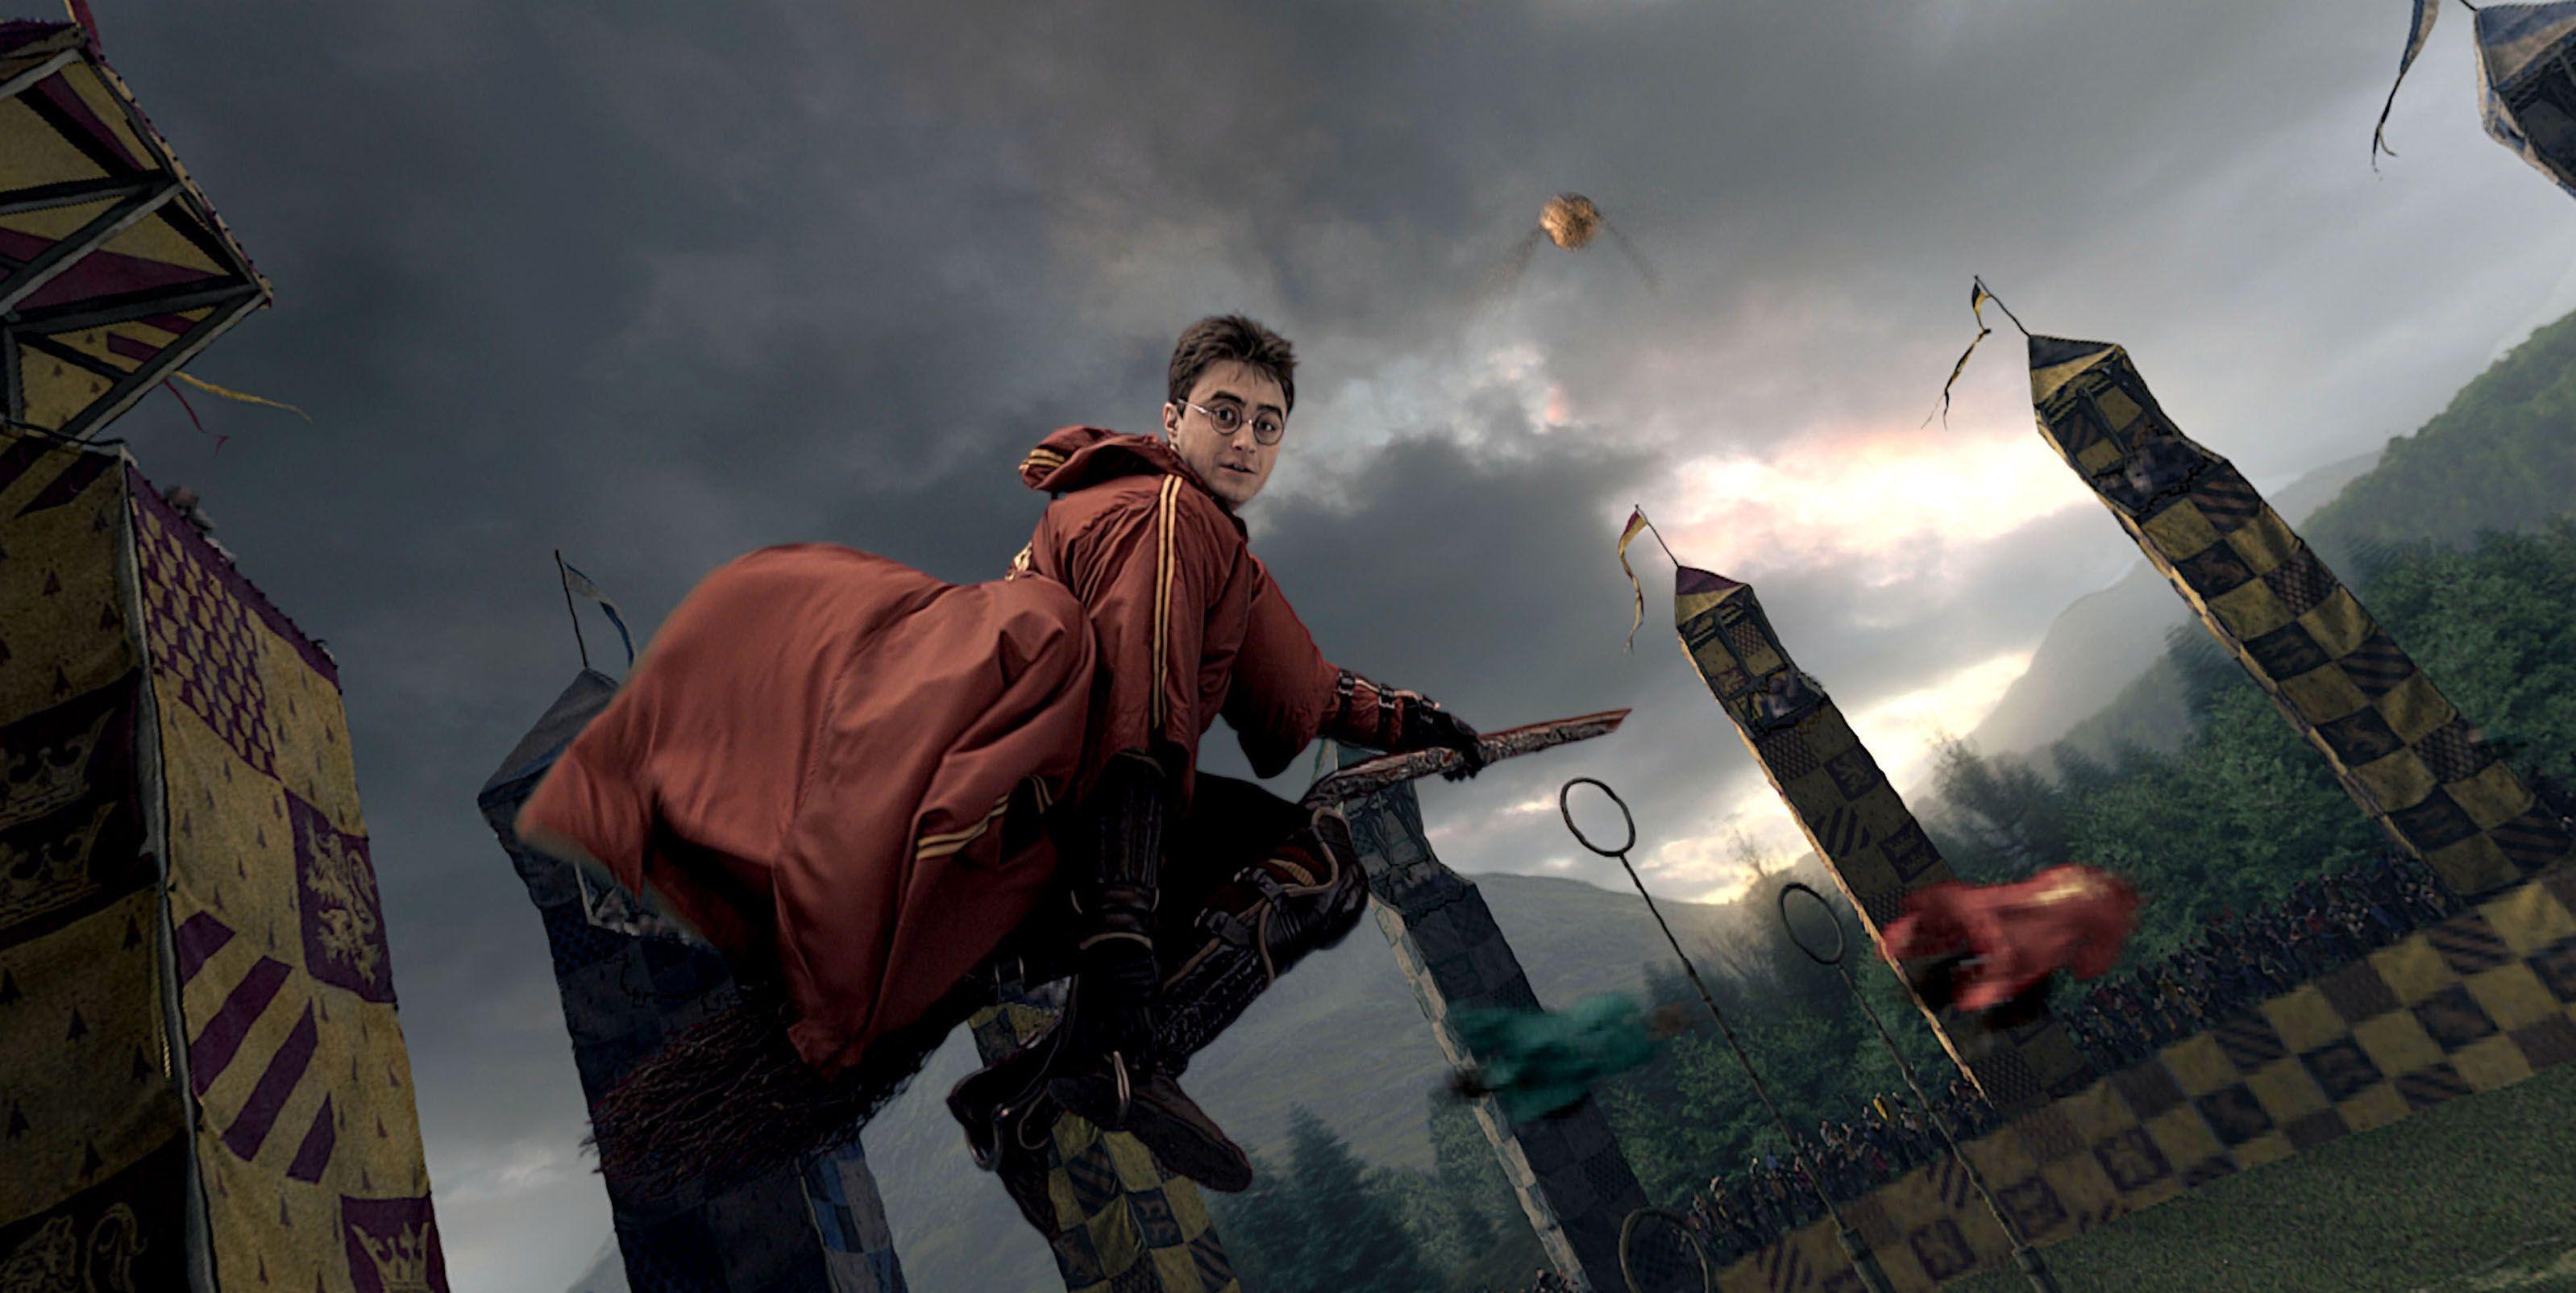 Harry Potter flying on a broom in his quidditch uniform